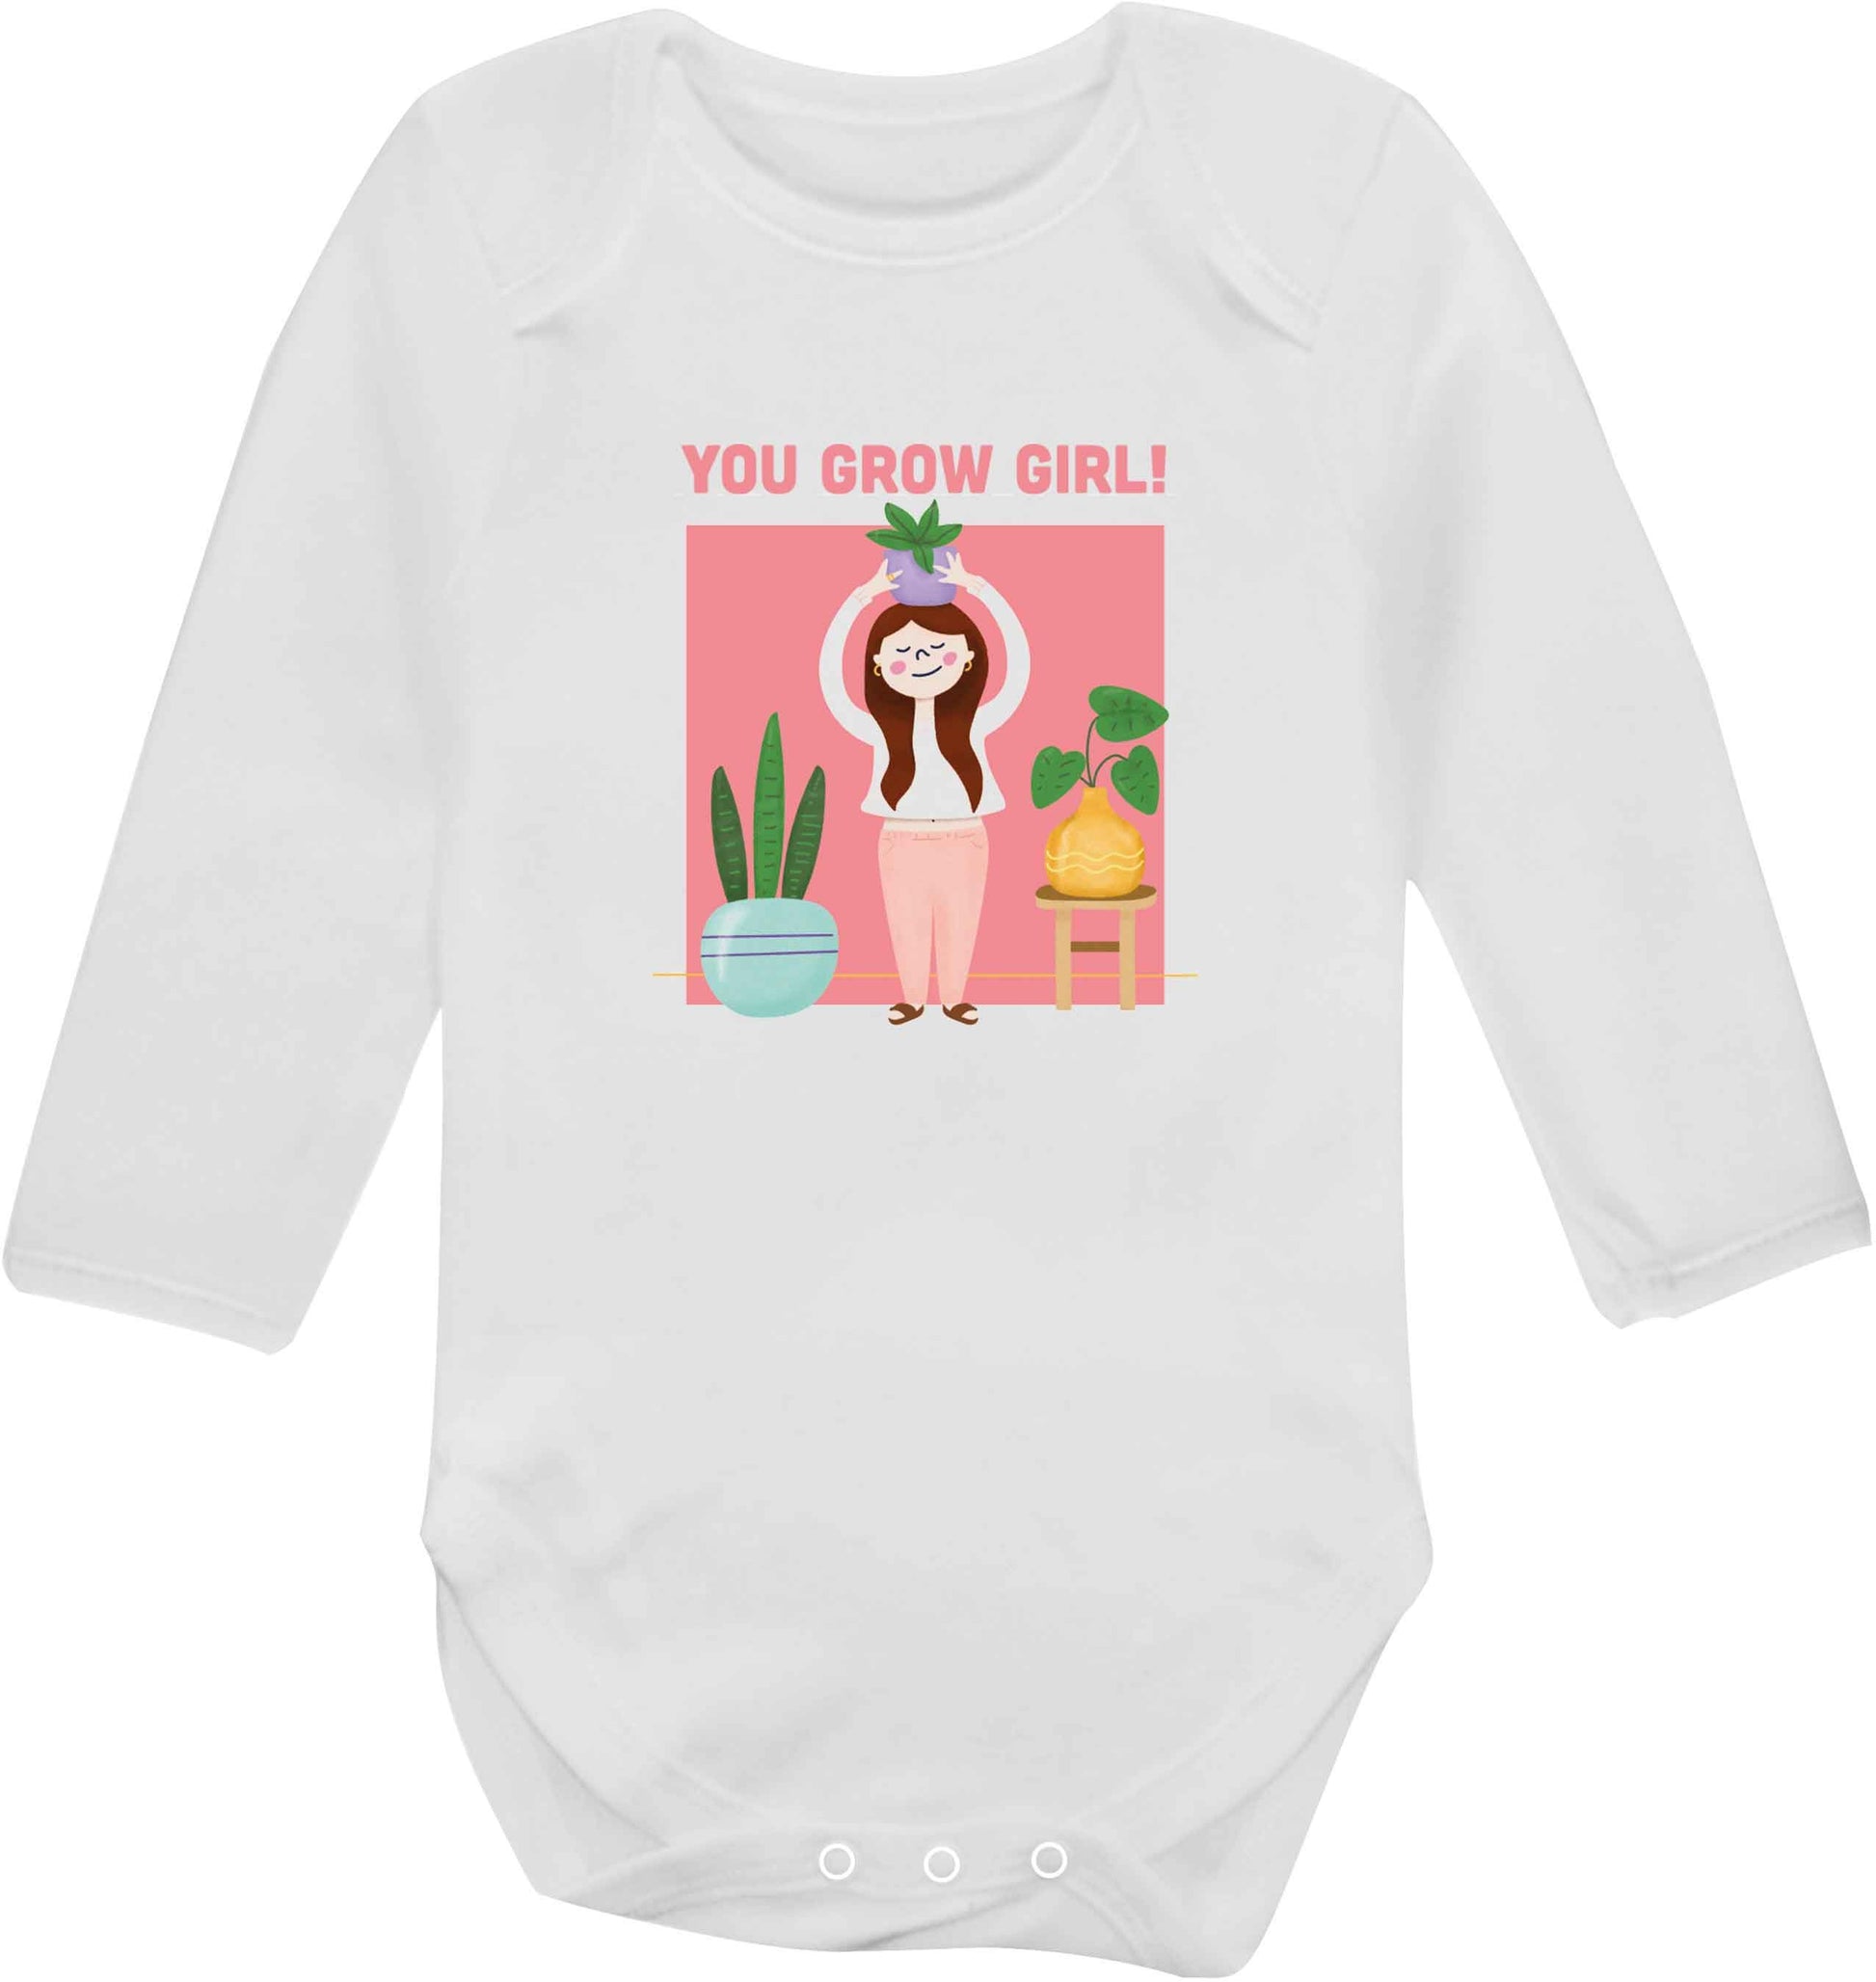 You grow girl baby vest long sleeved white 6-12 months